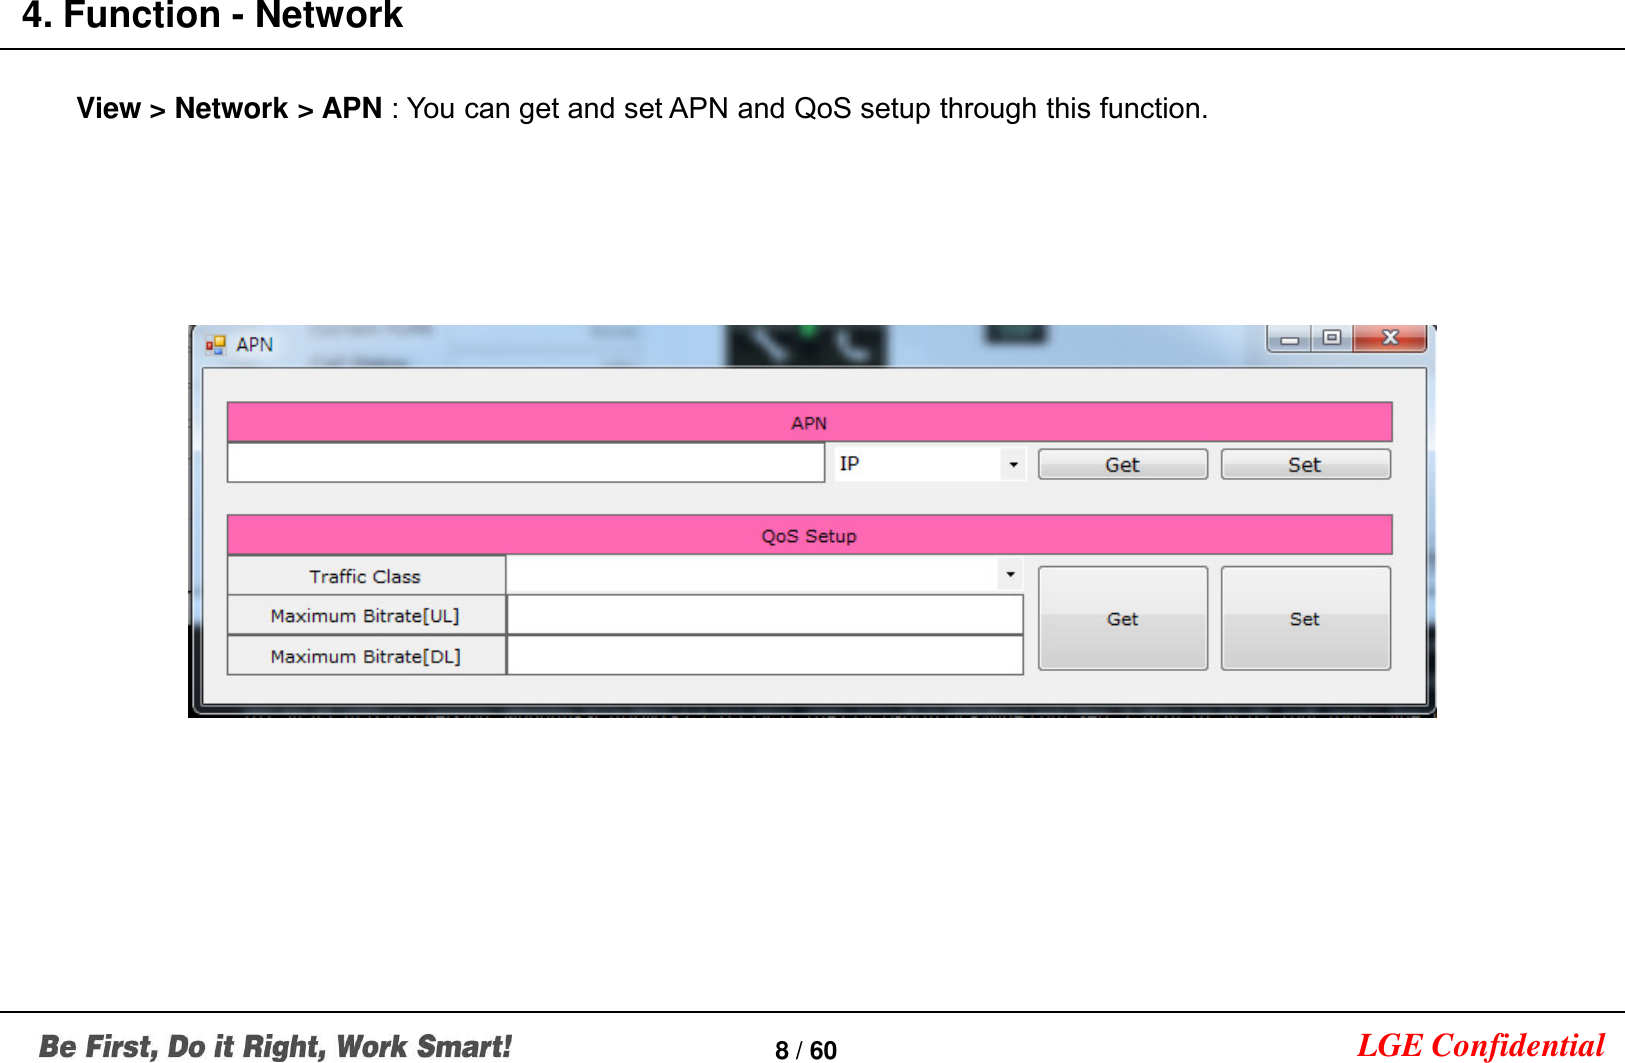 LGE Confidential4. Function - Network8 / 60View &gt; Network &gt; APN : You can get and set APN and QoS setup through this function.